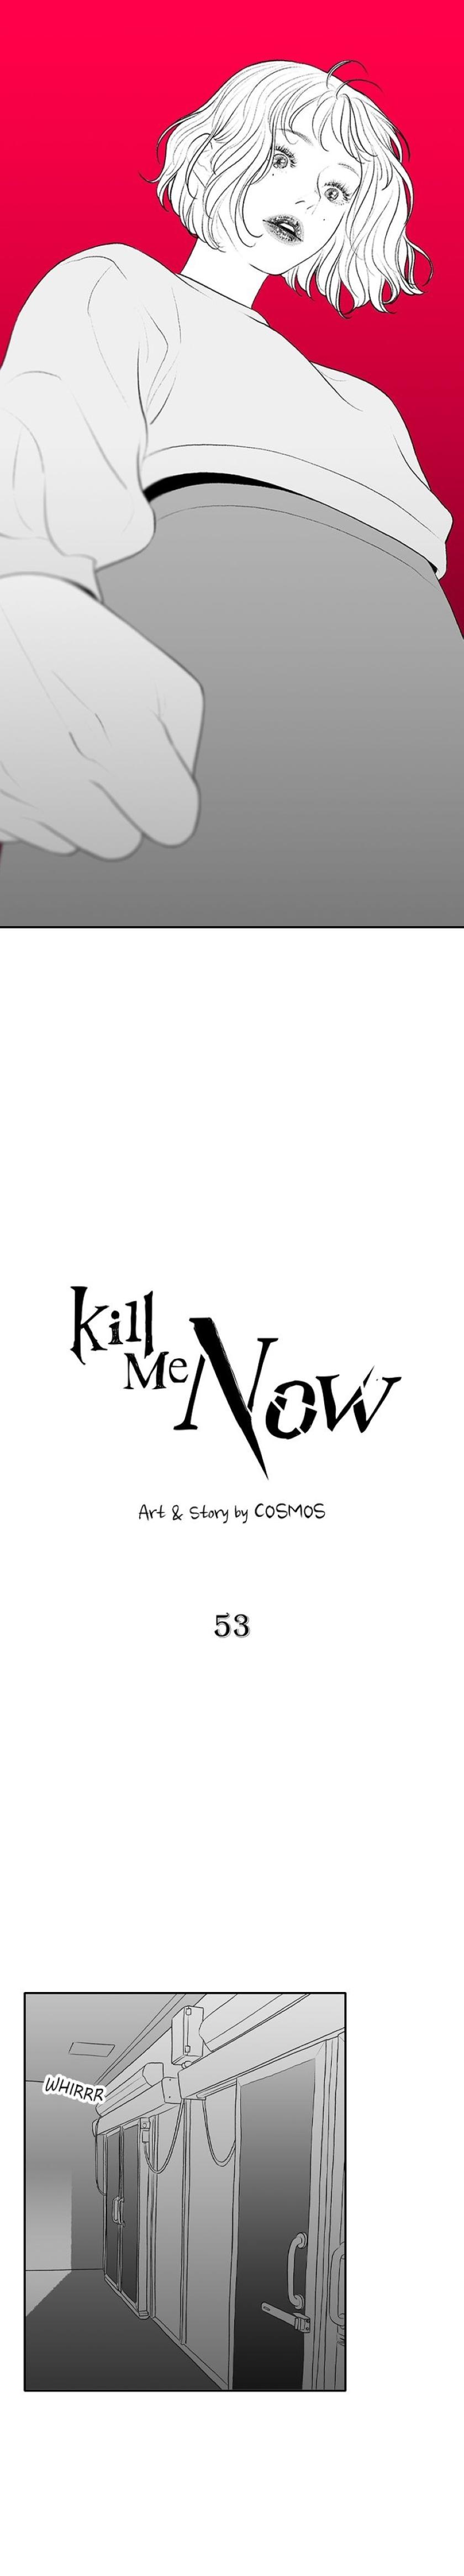 Kill Me Now - Page 4